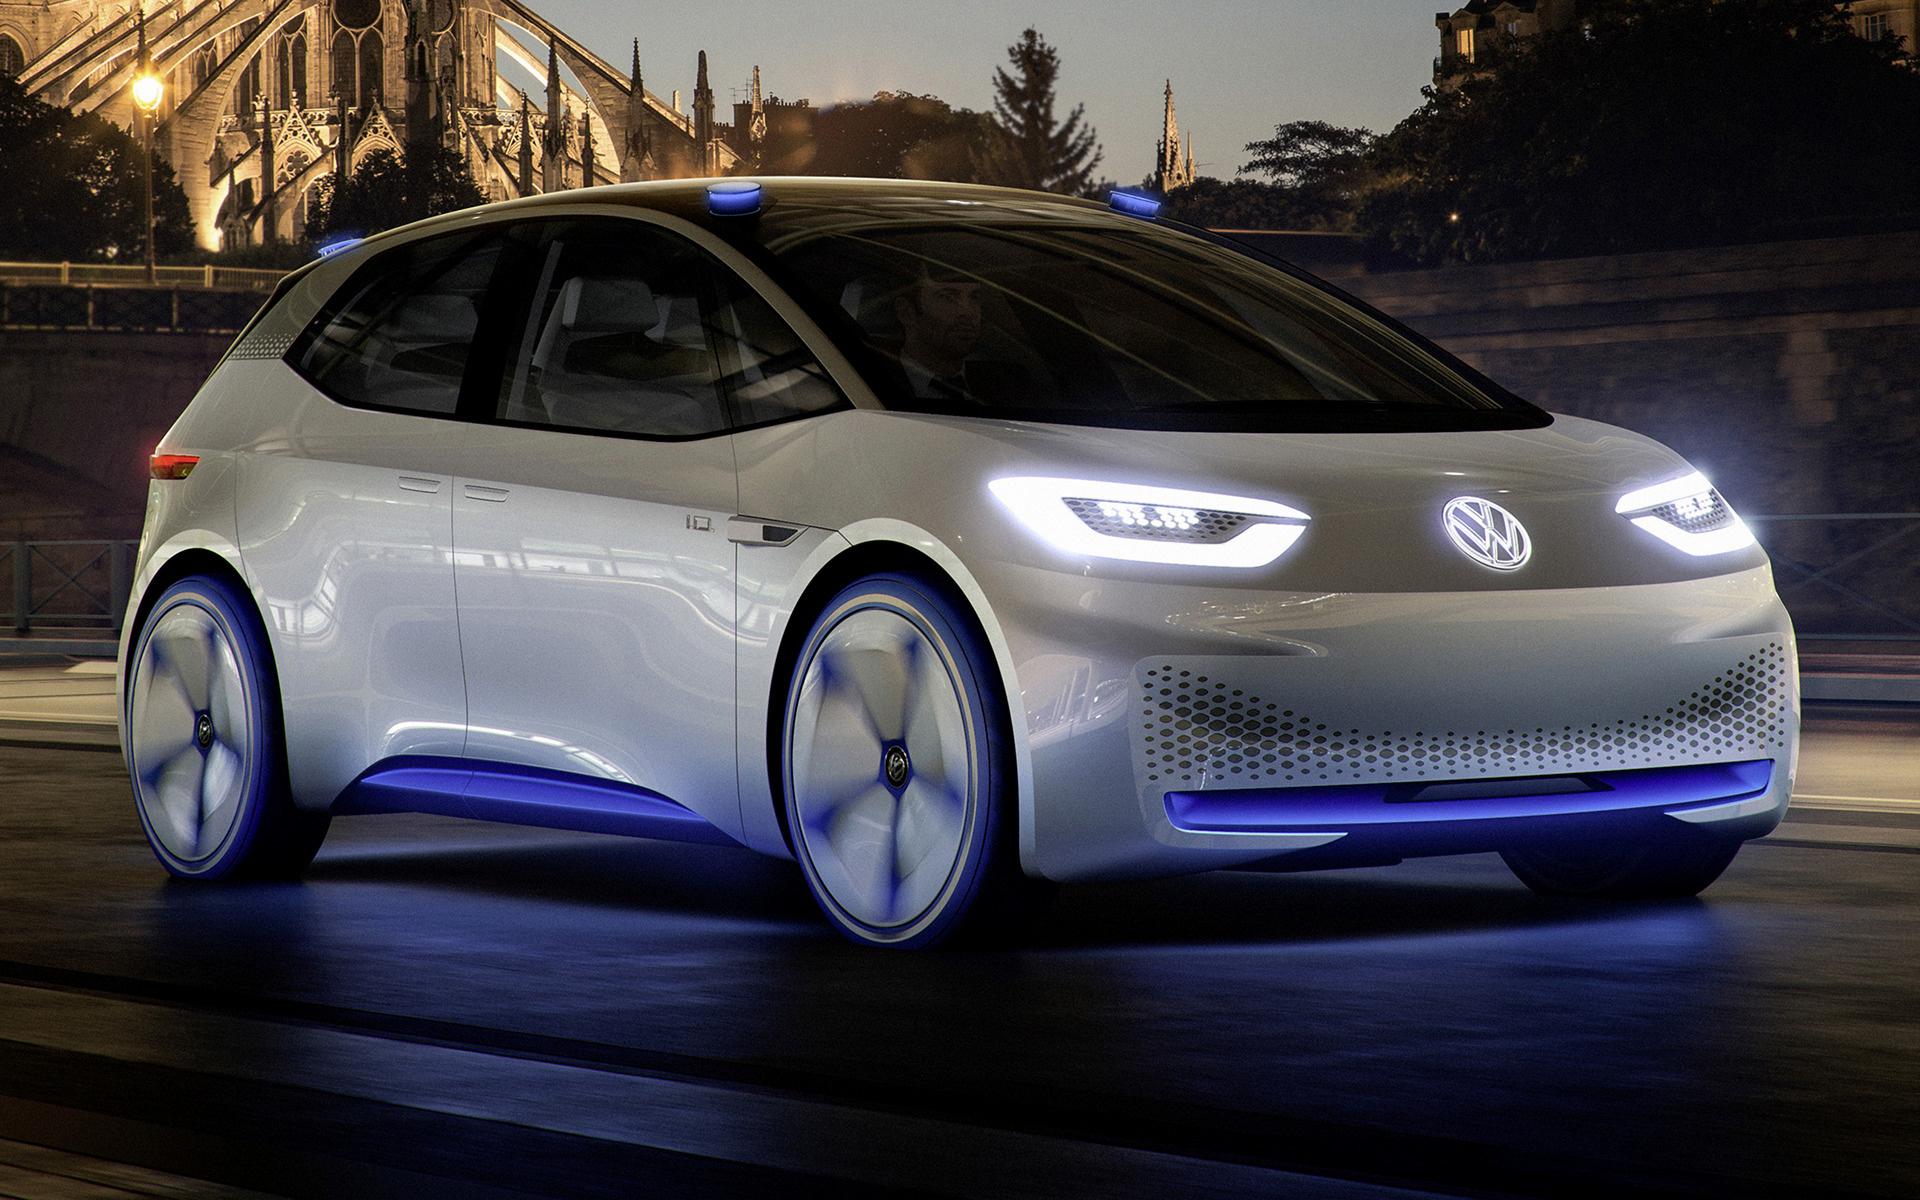 Volkswagen I.D. Concept and HD Image